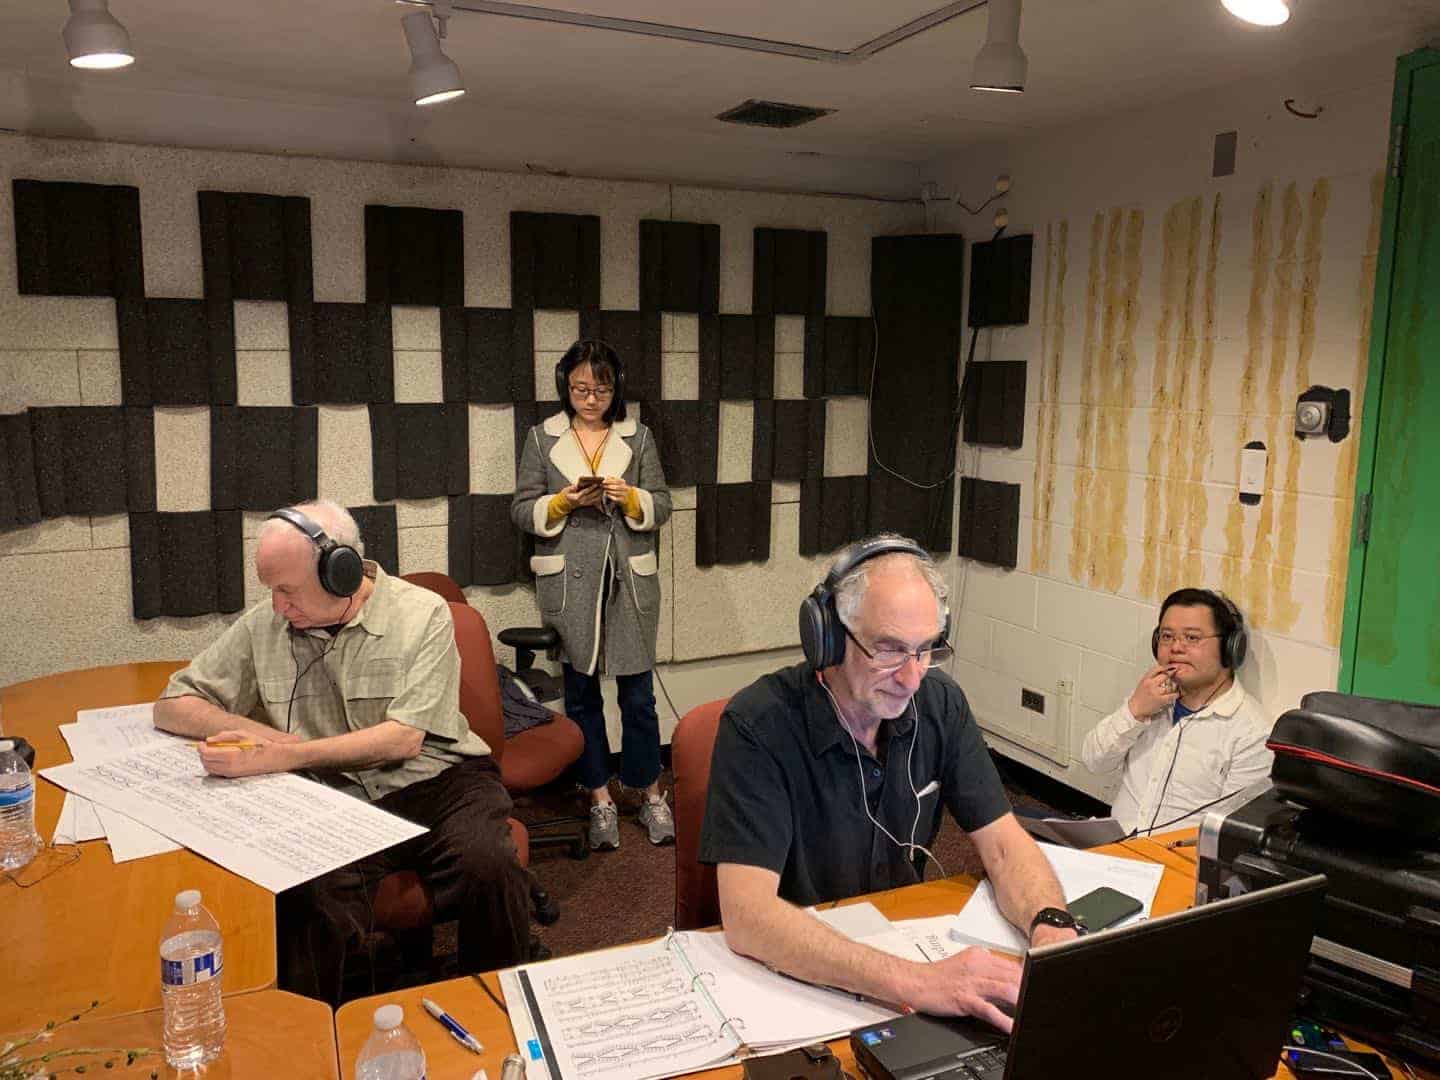 From left to right: David Witten, Jiahui Suo, Joel Gordon and Quan Yuan at a Tcherepnin recording and editing session in April 2019